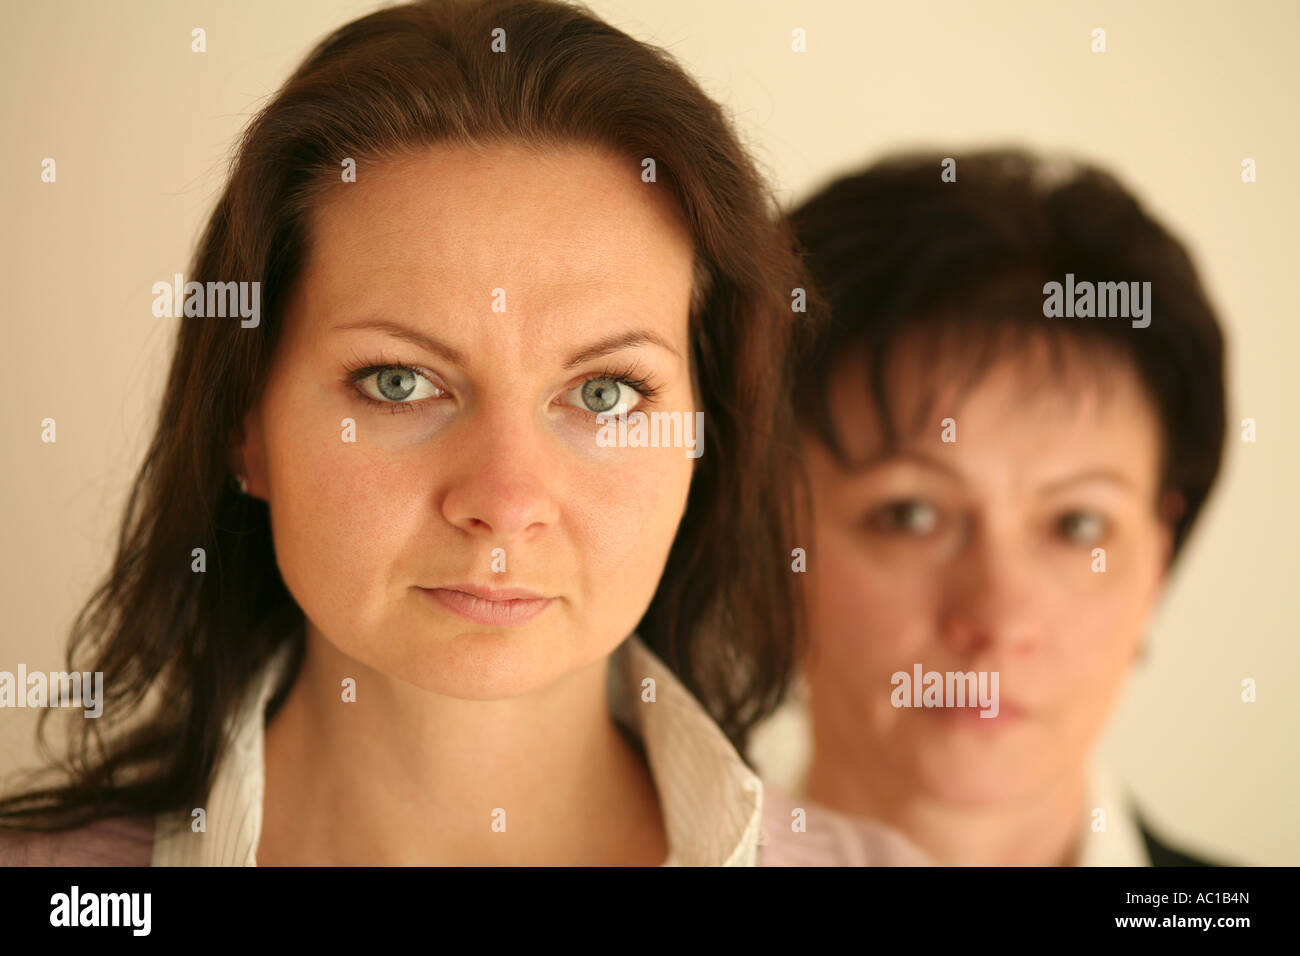 Mother and daughter mother in background portrait Stock Photo